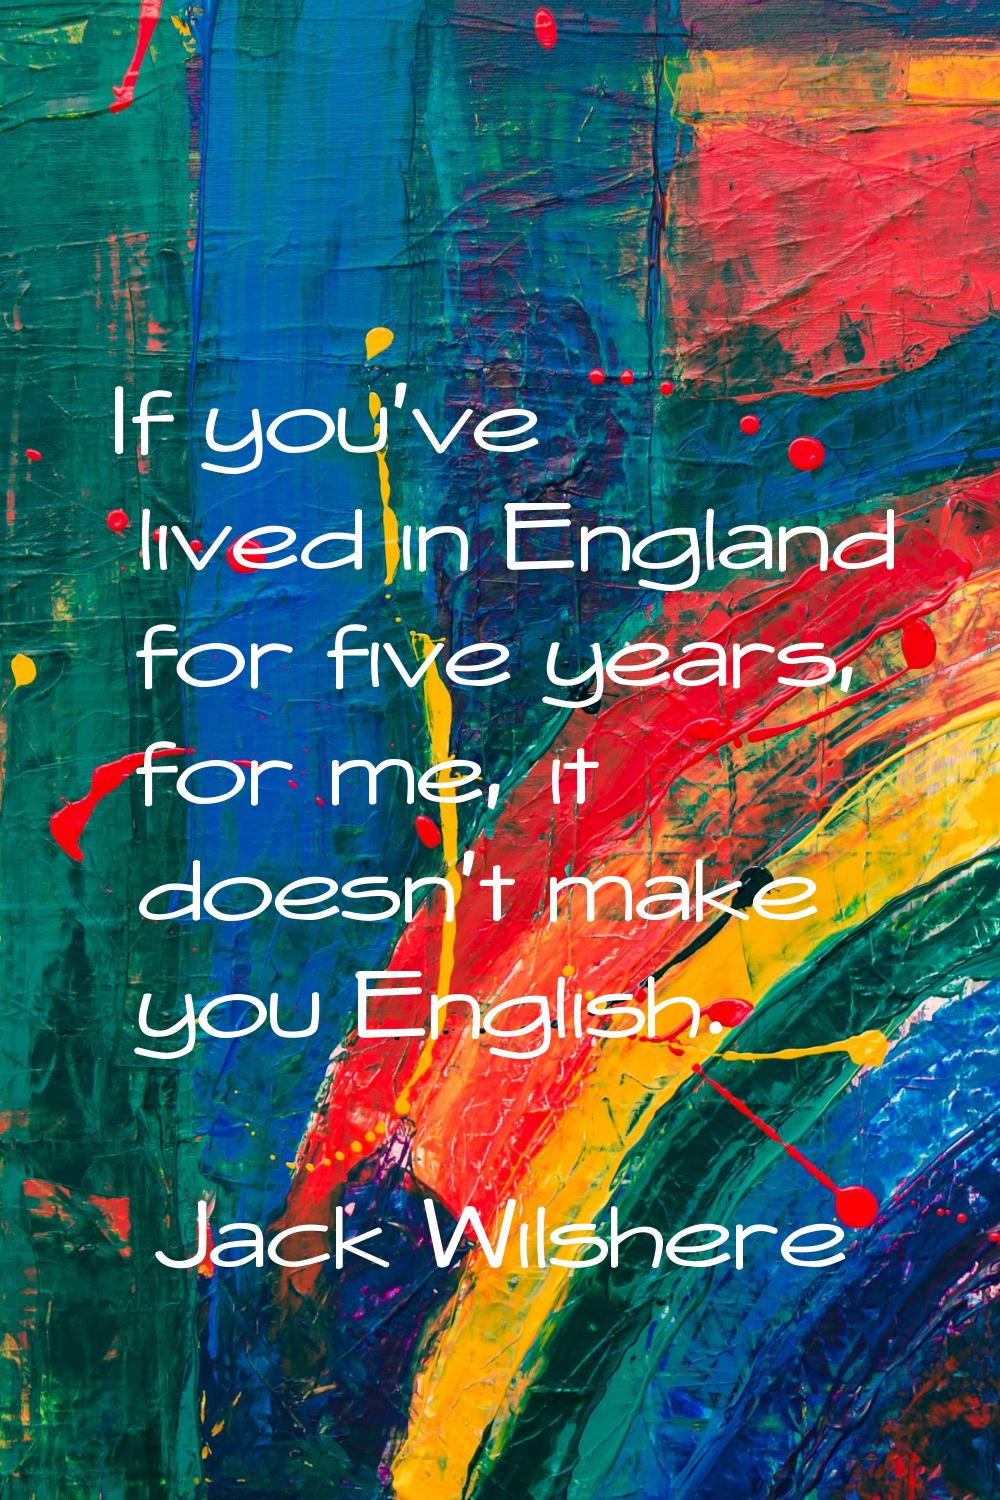 If you've lived in England for five years, for me, it doesn't make you English.